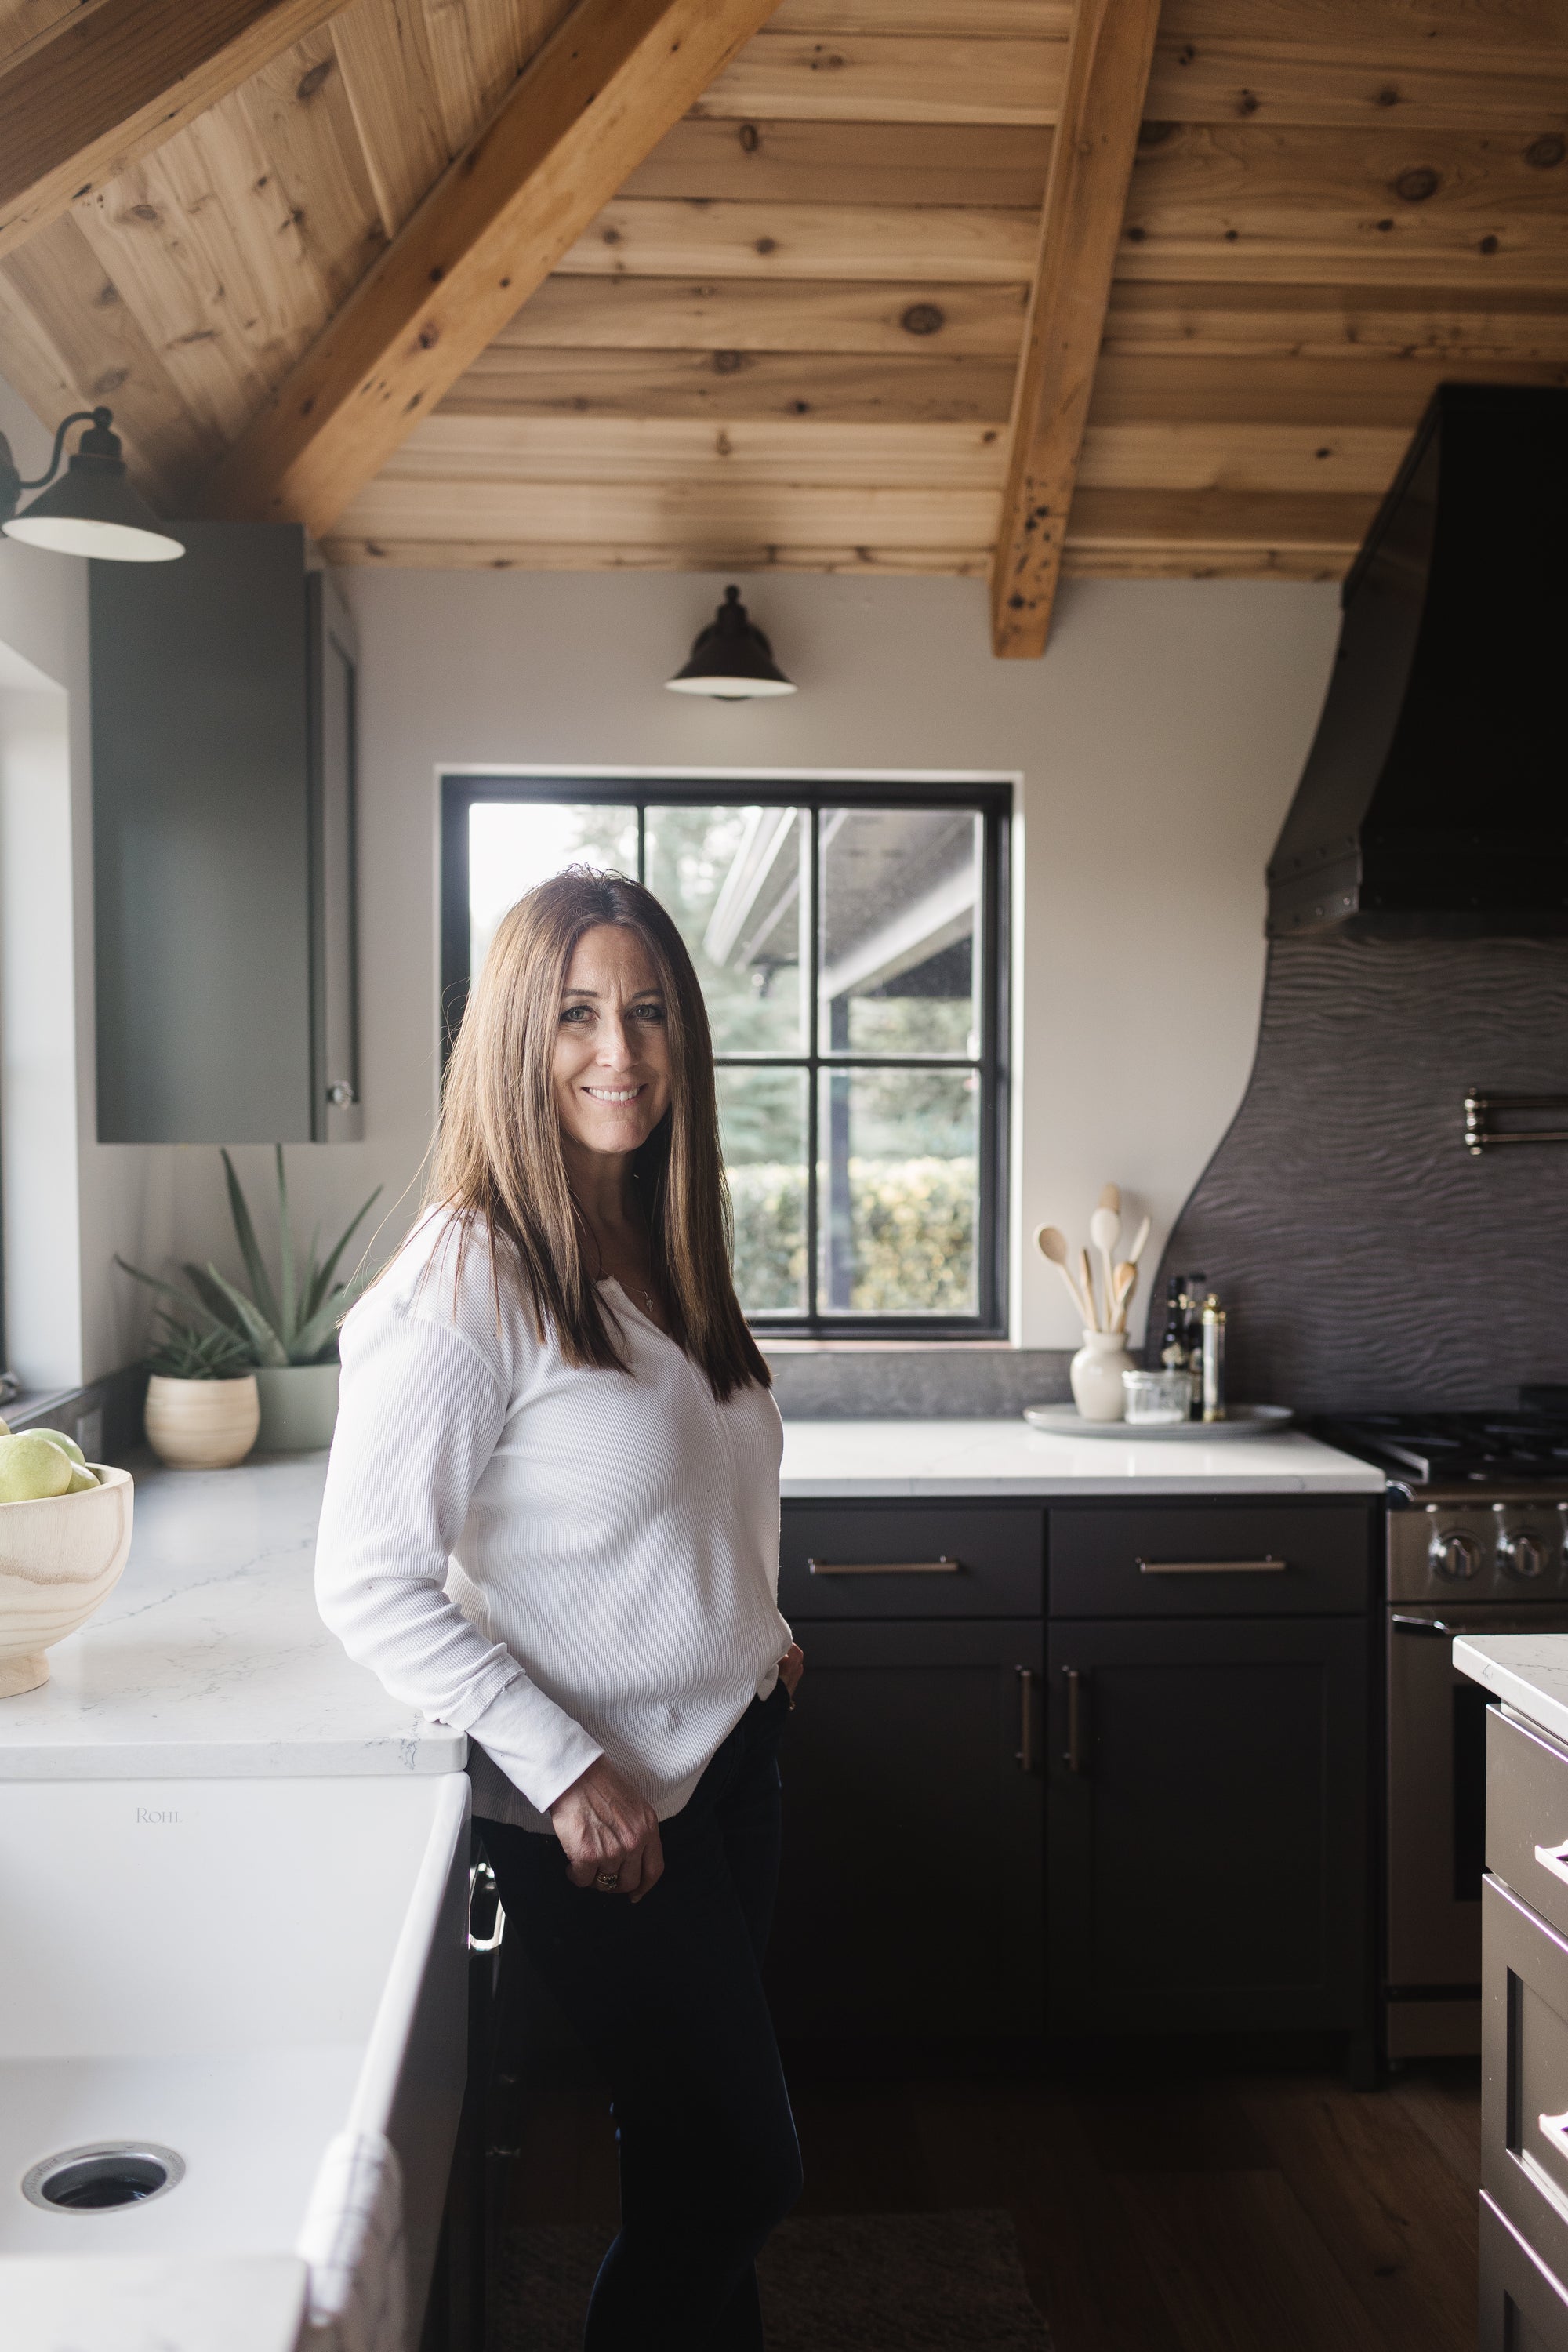 Owner Juleen Pudists standing in a white kitchen with black accents and a steel range hood.